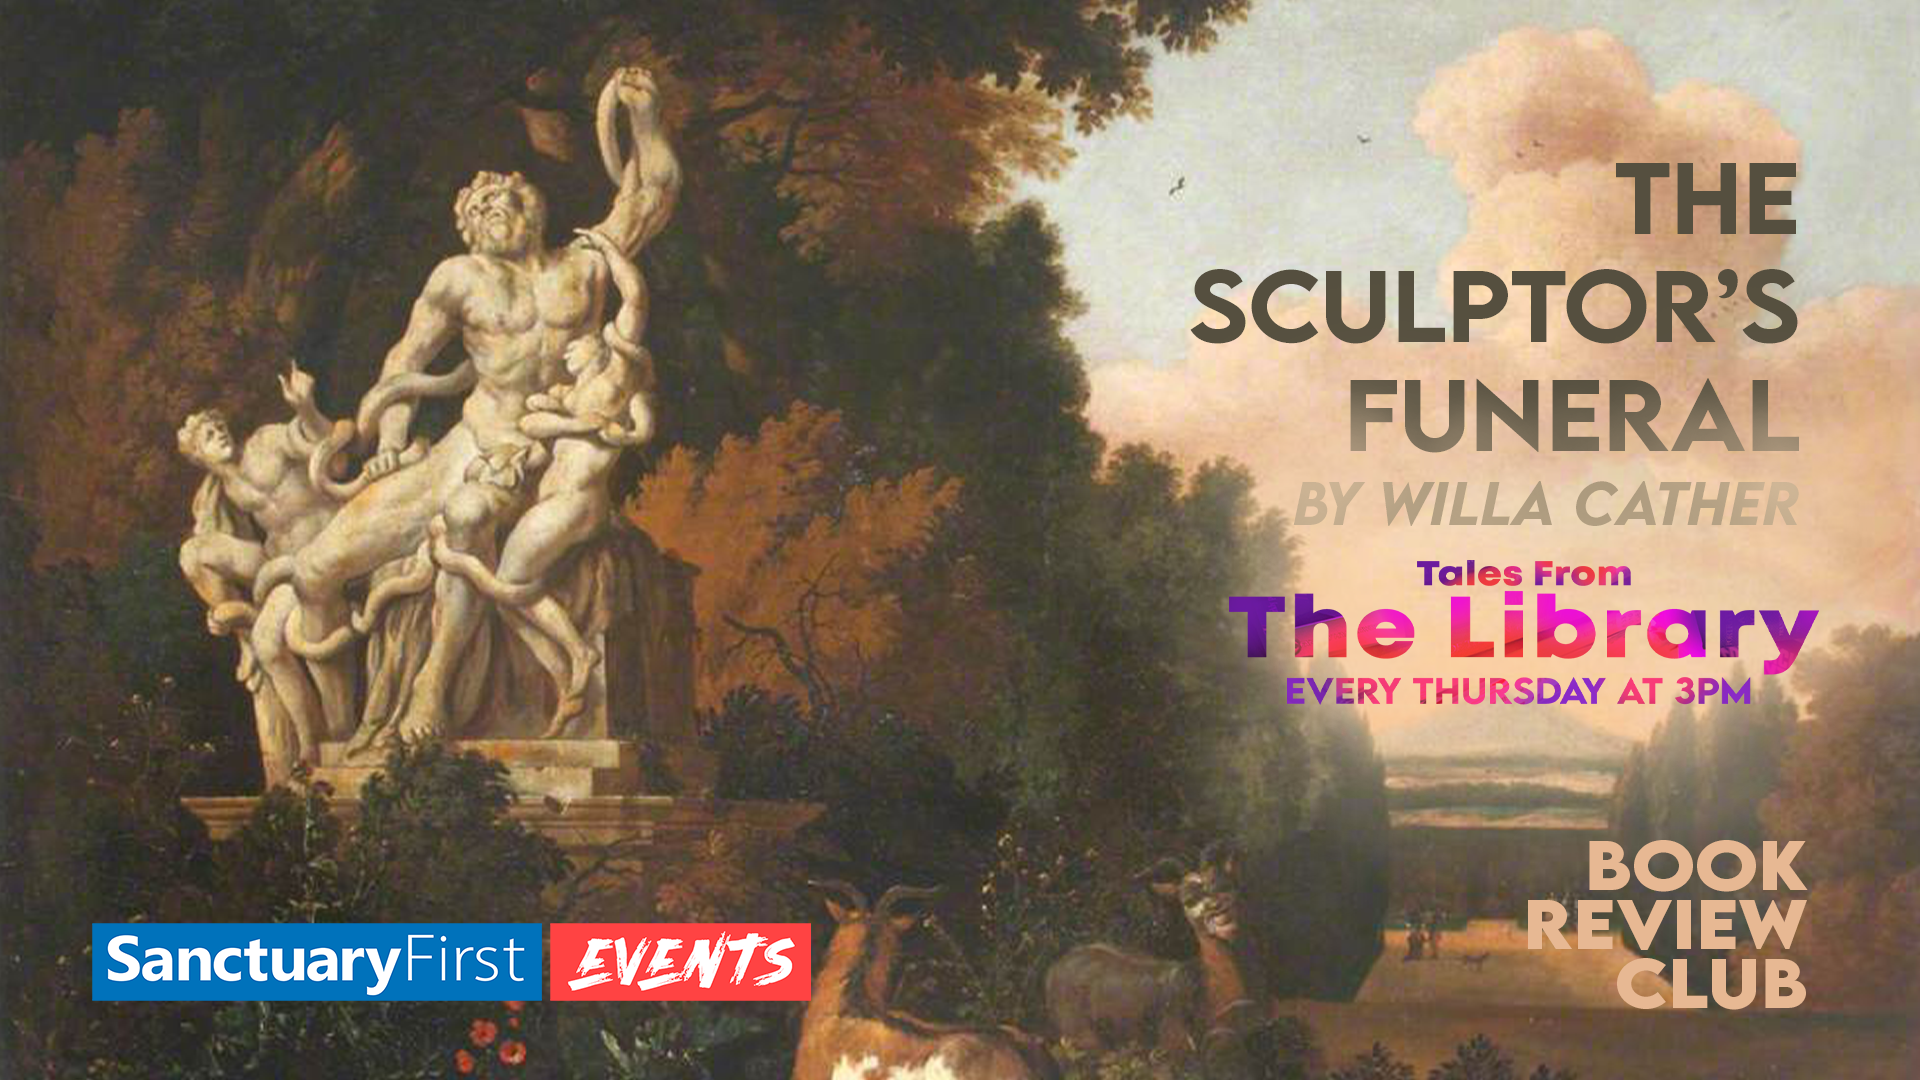 Tales From The Library - The Sculptors Funeral